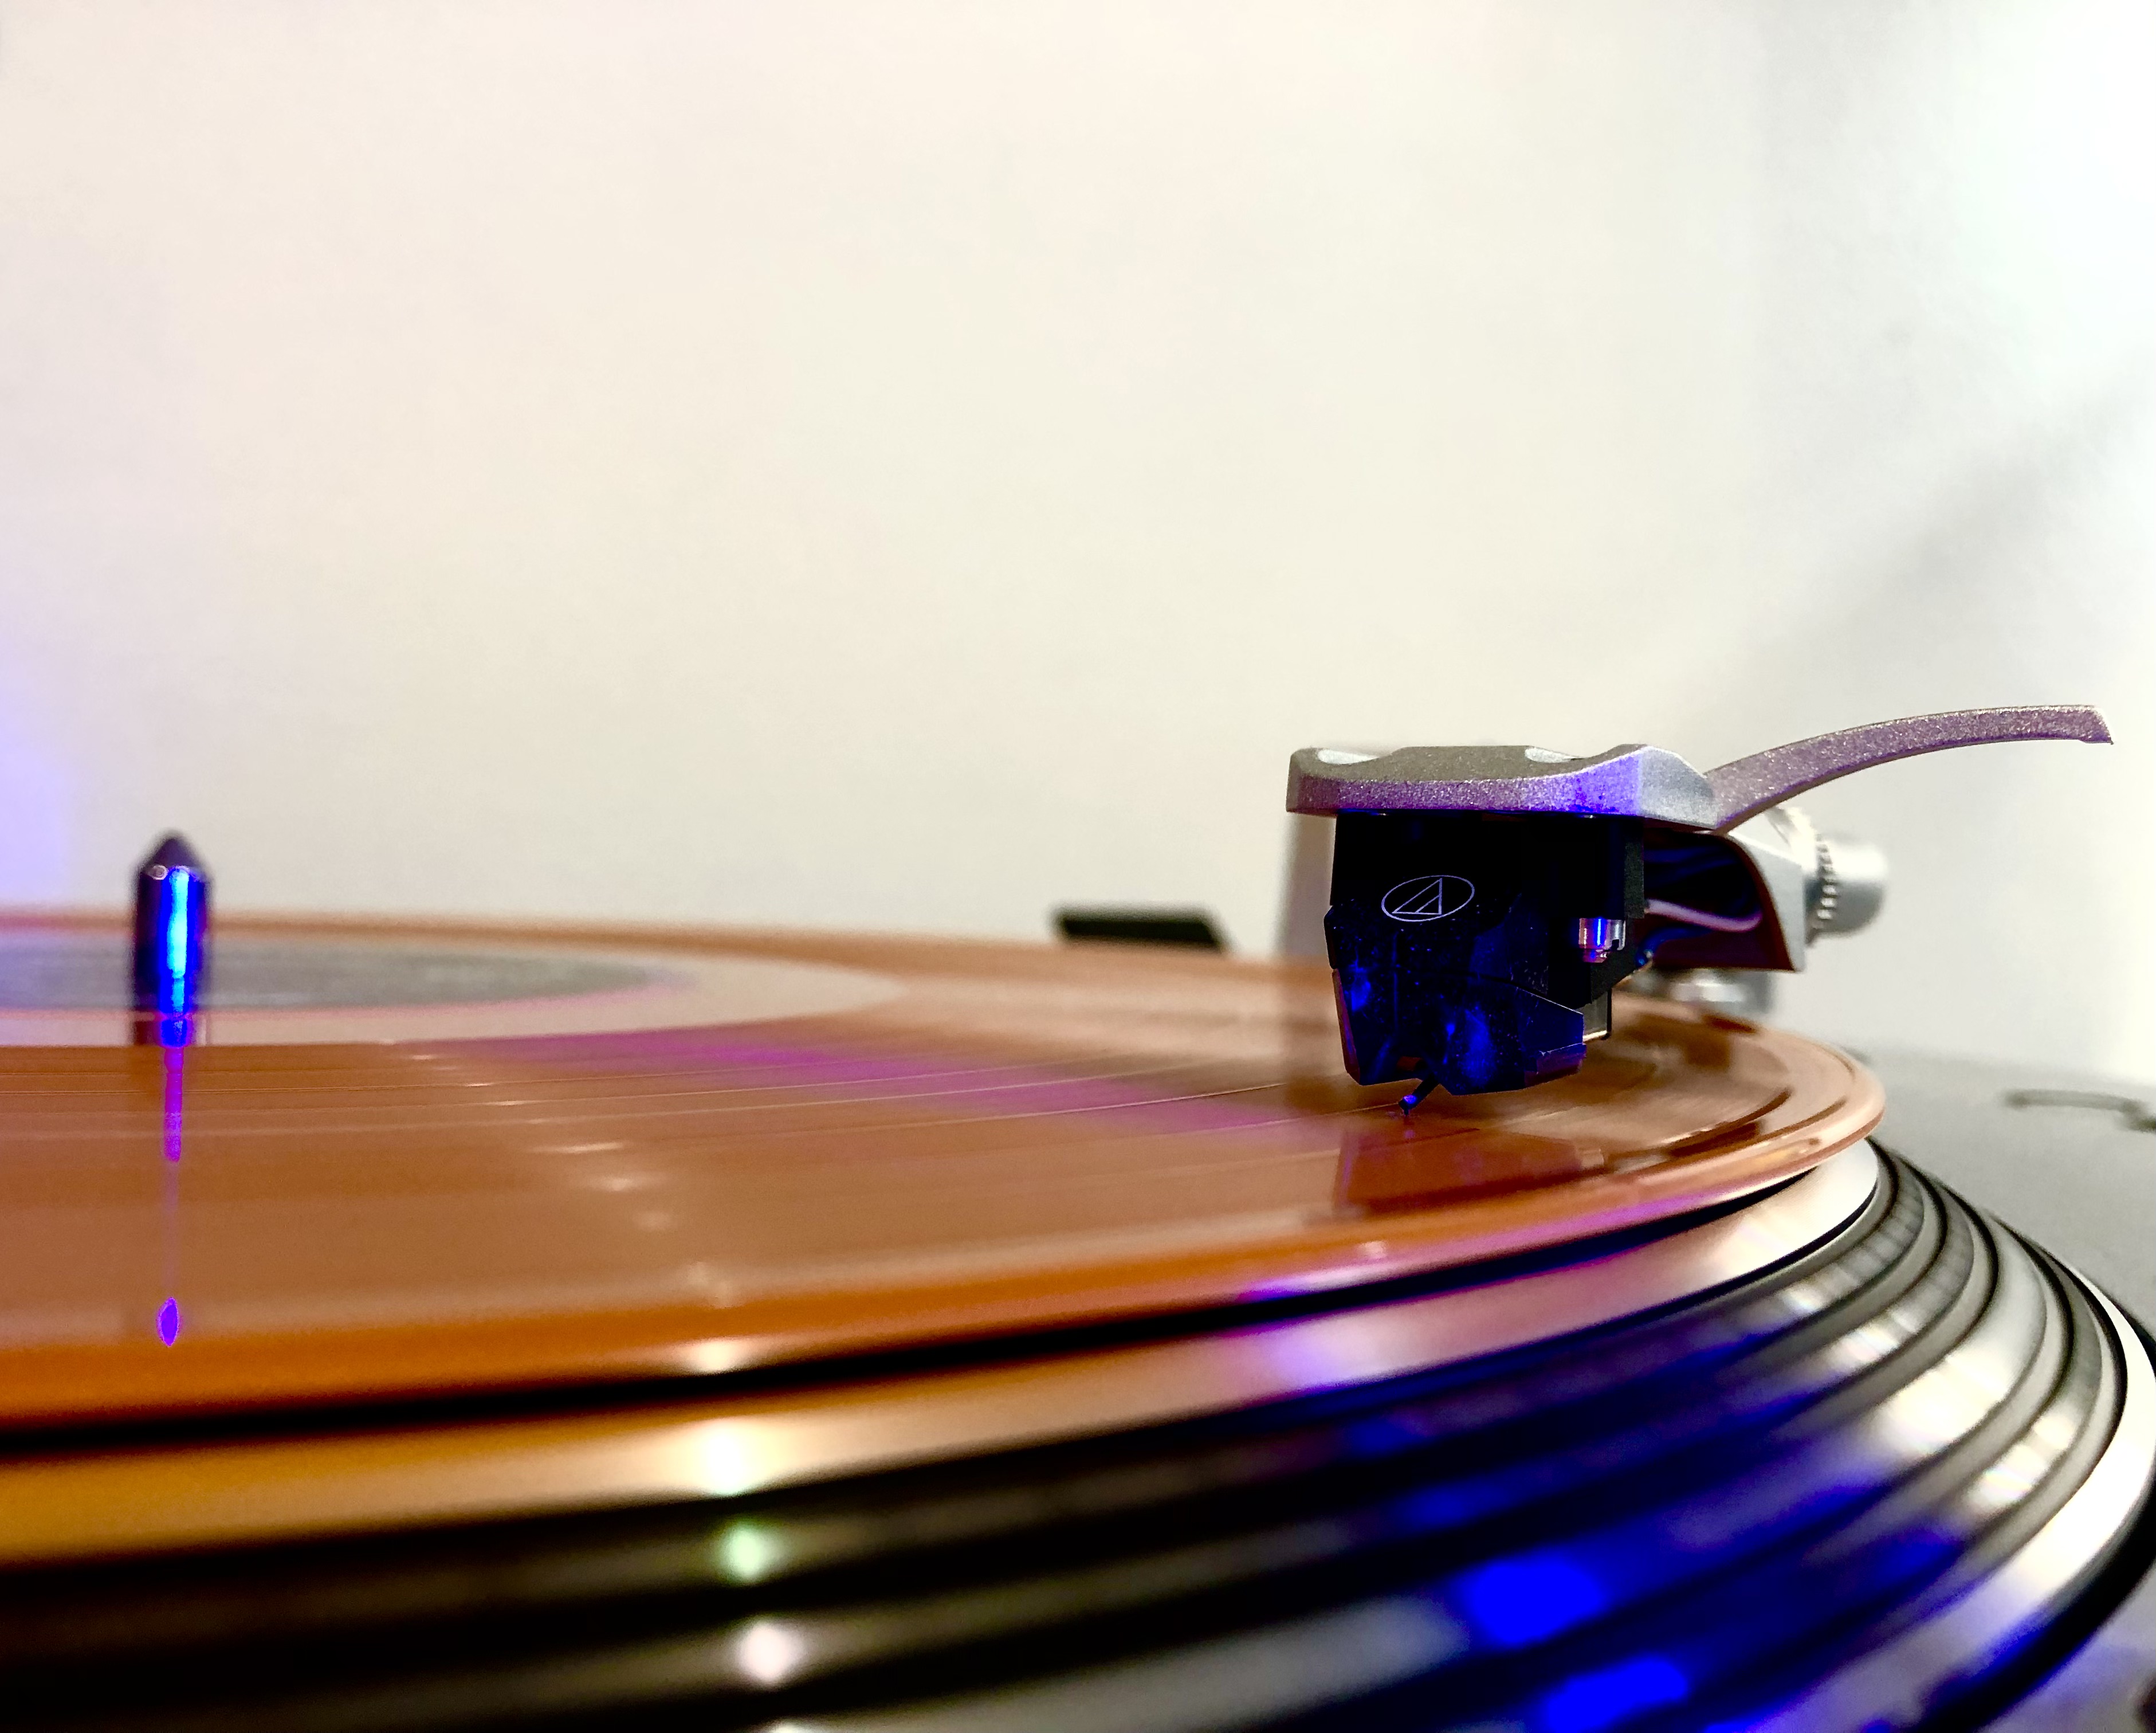 15 of the best vinyl records to test your turntable